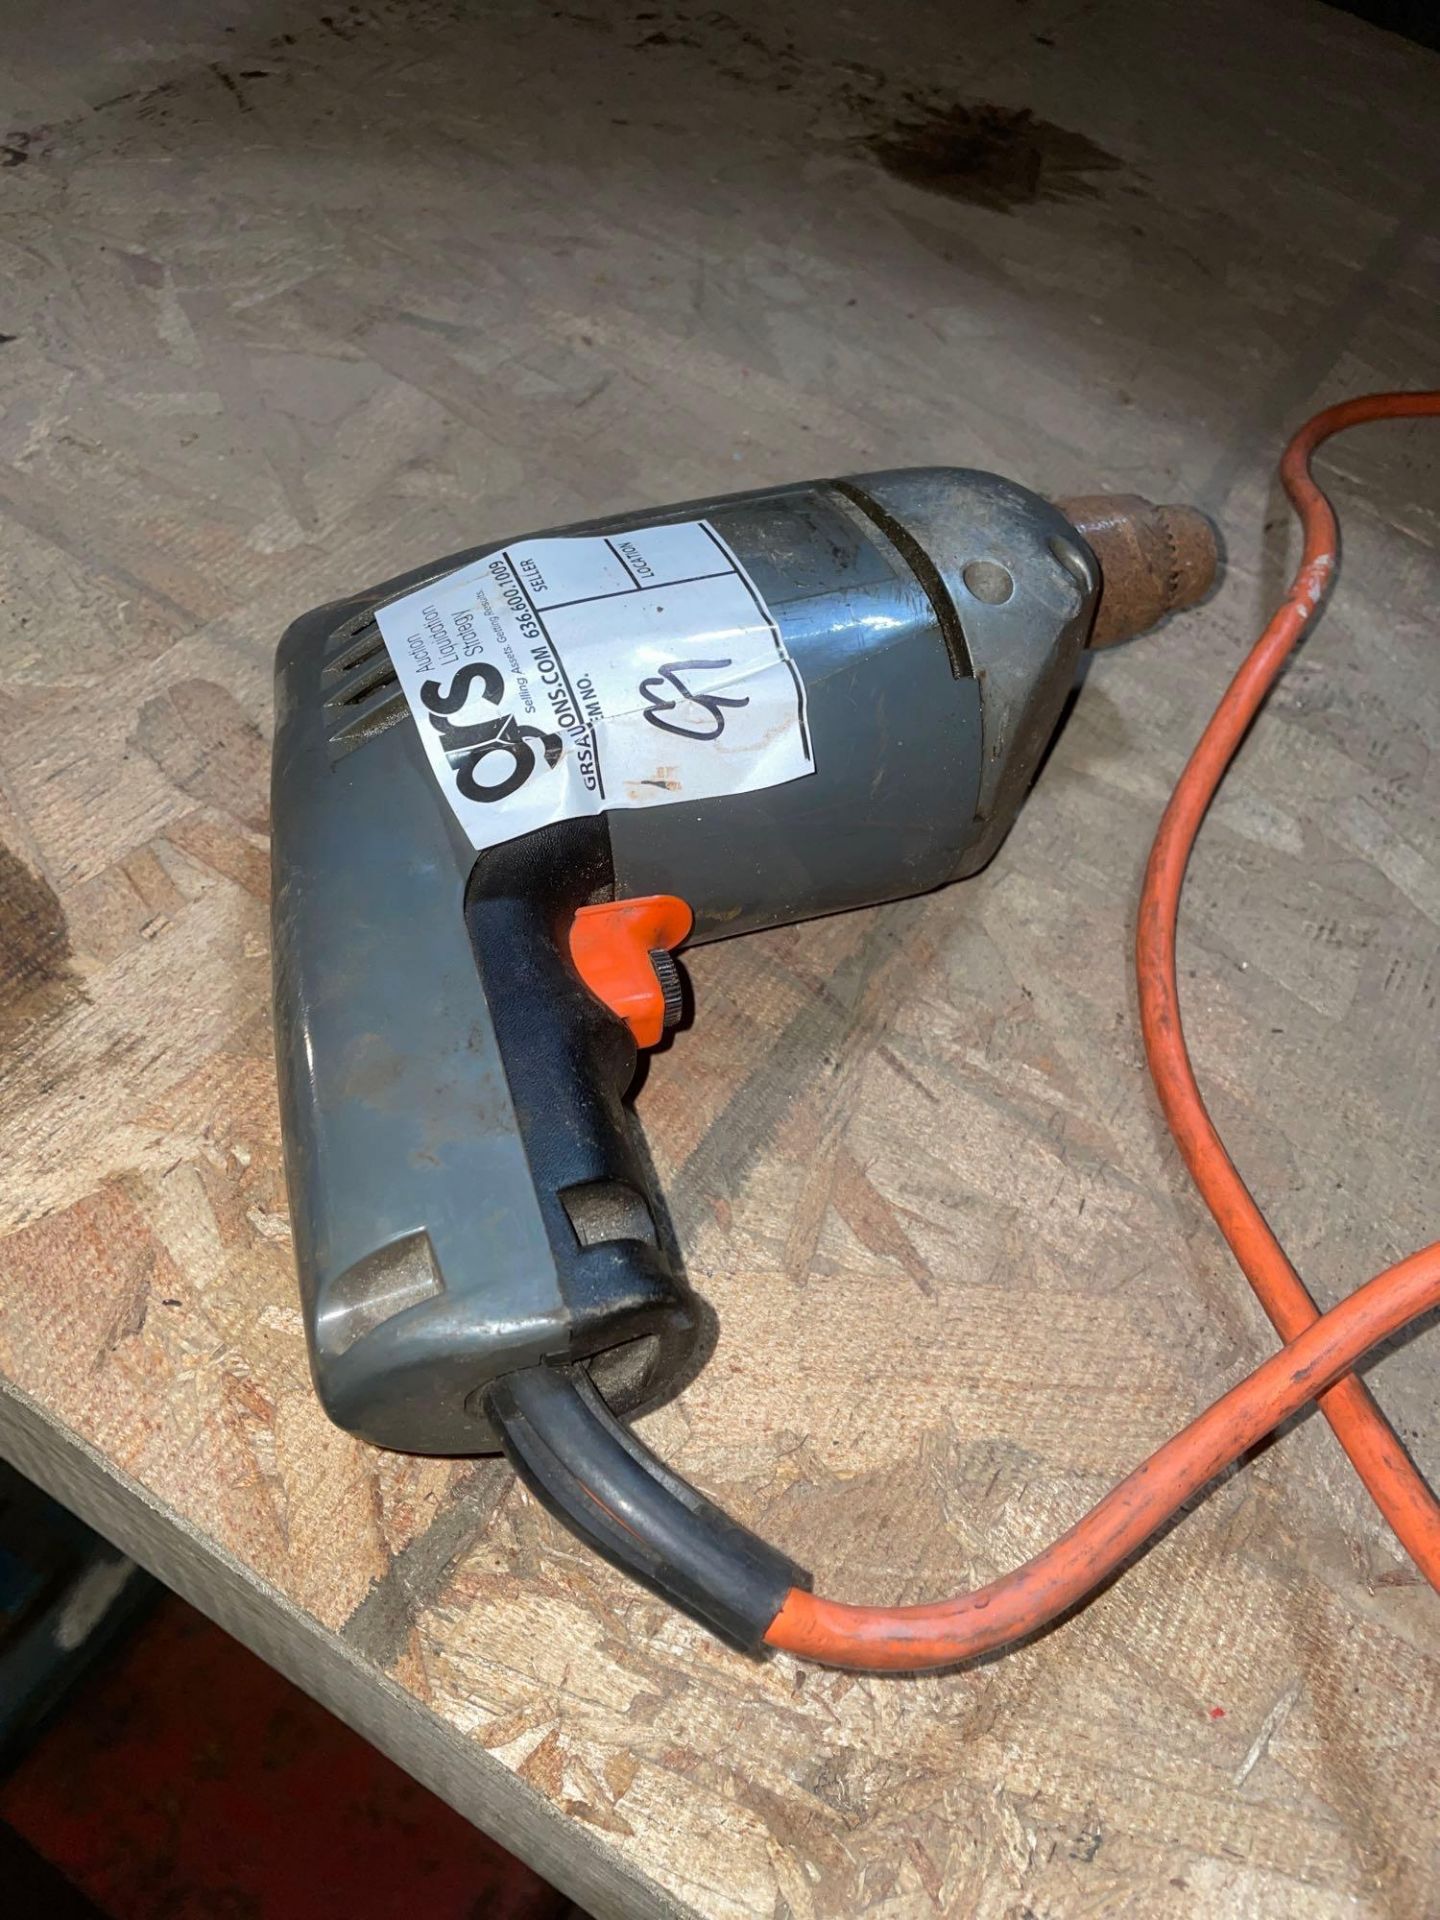 Electric Corded Drill